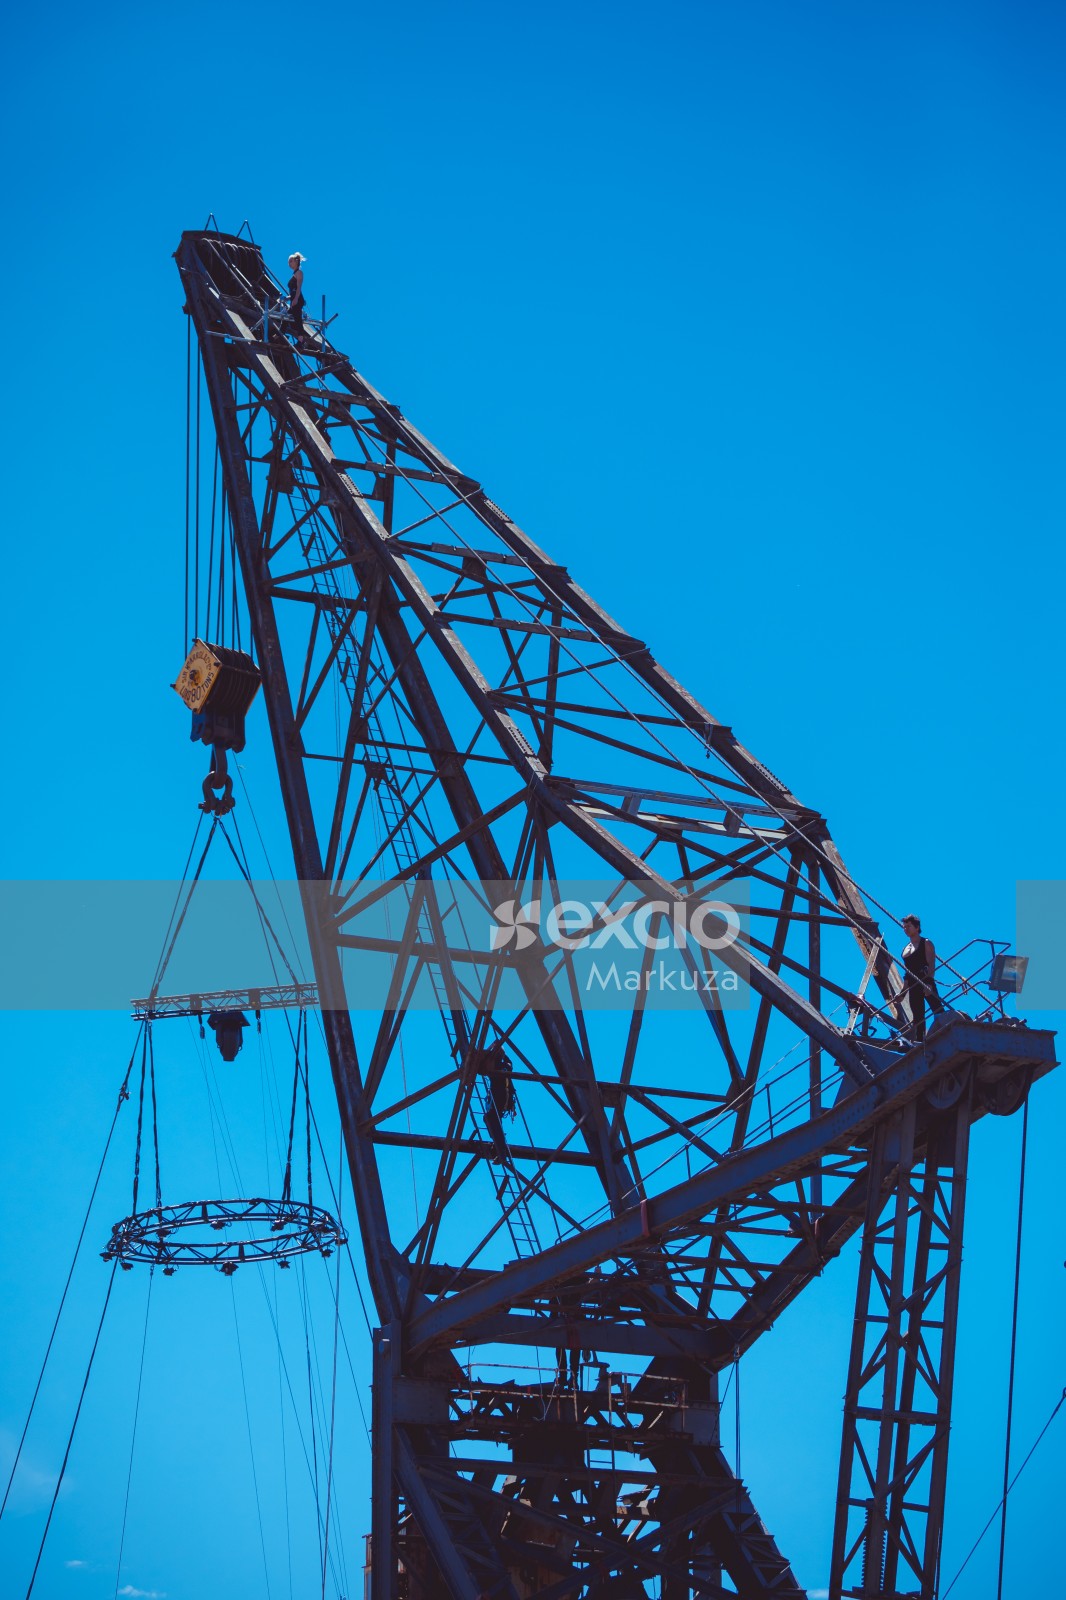 Performers on a large crane